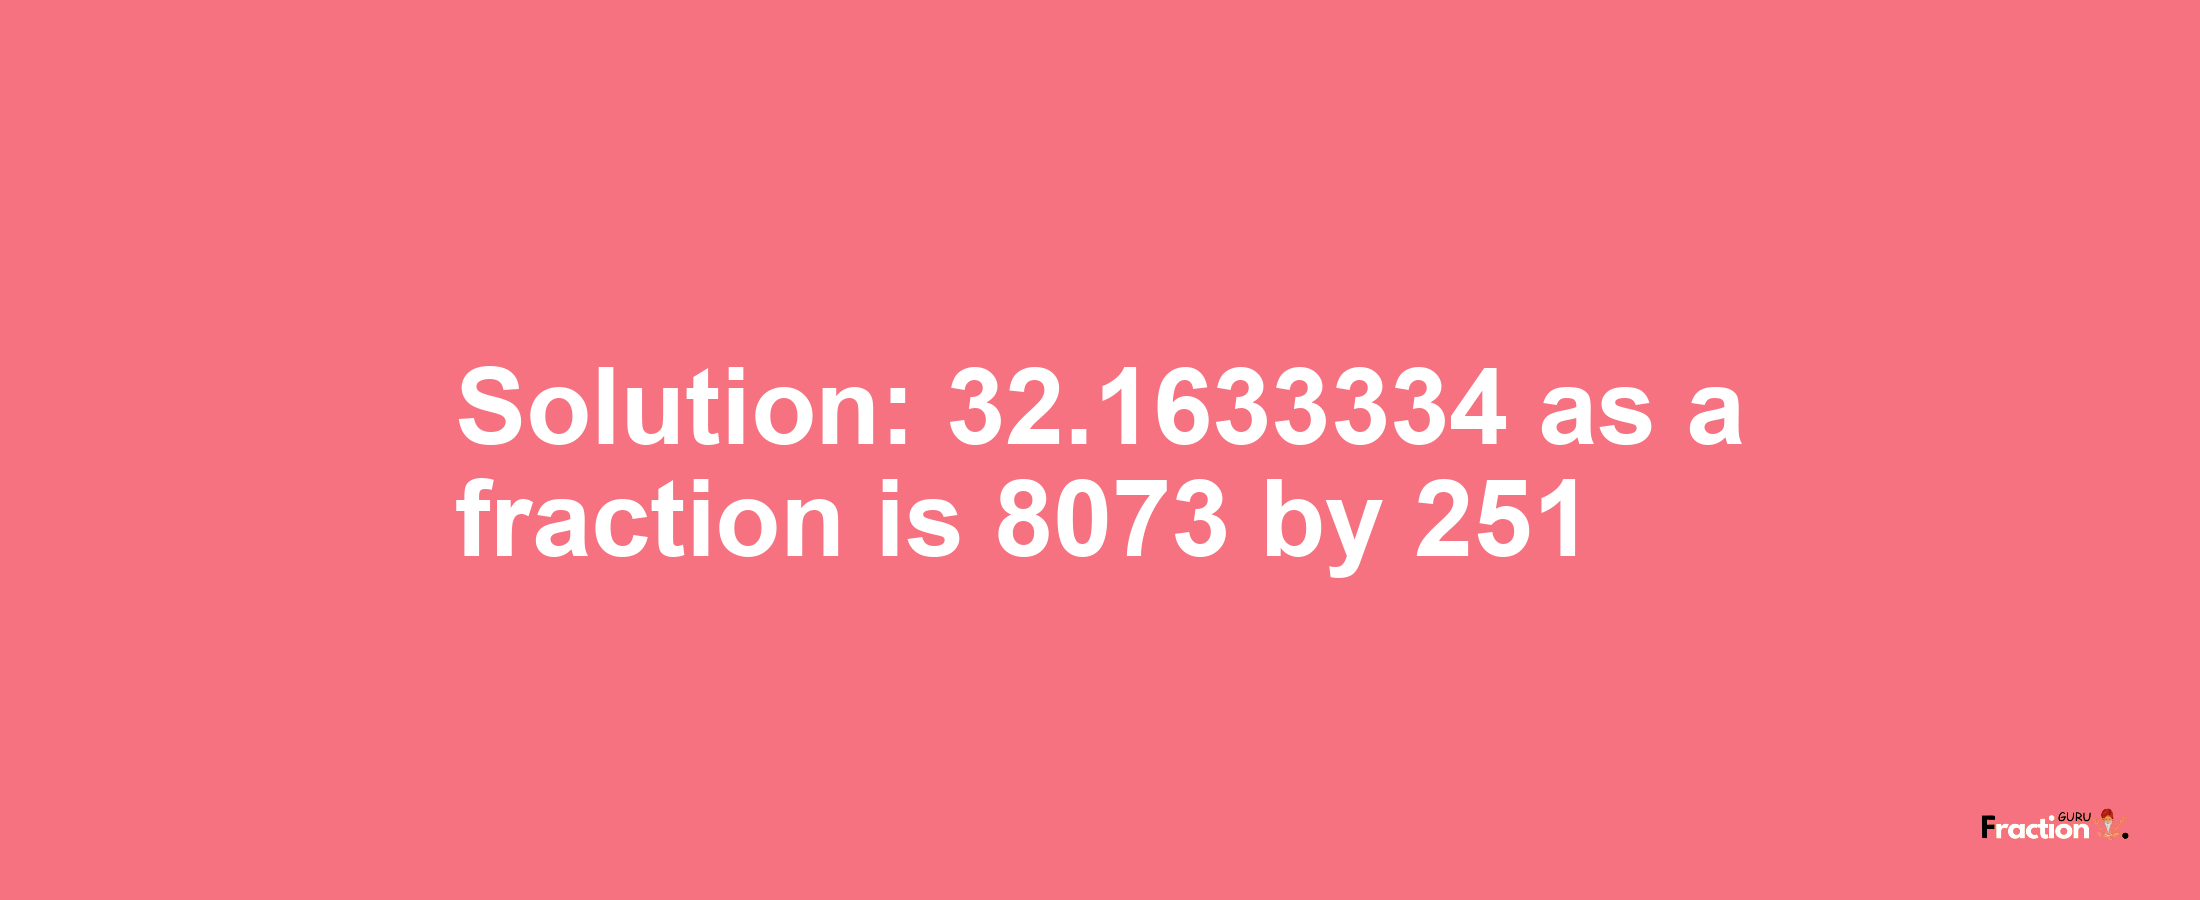 Solution:32.1633334 as a fraction is 8073/251